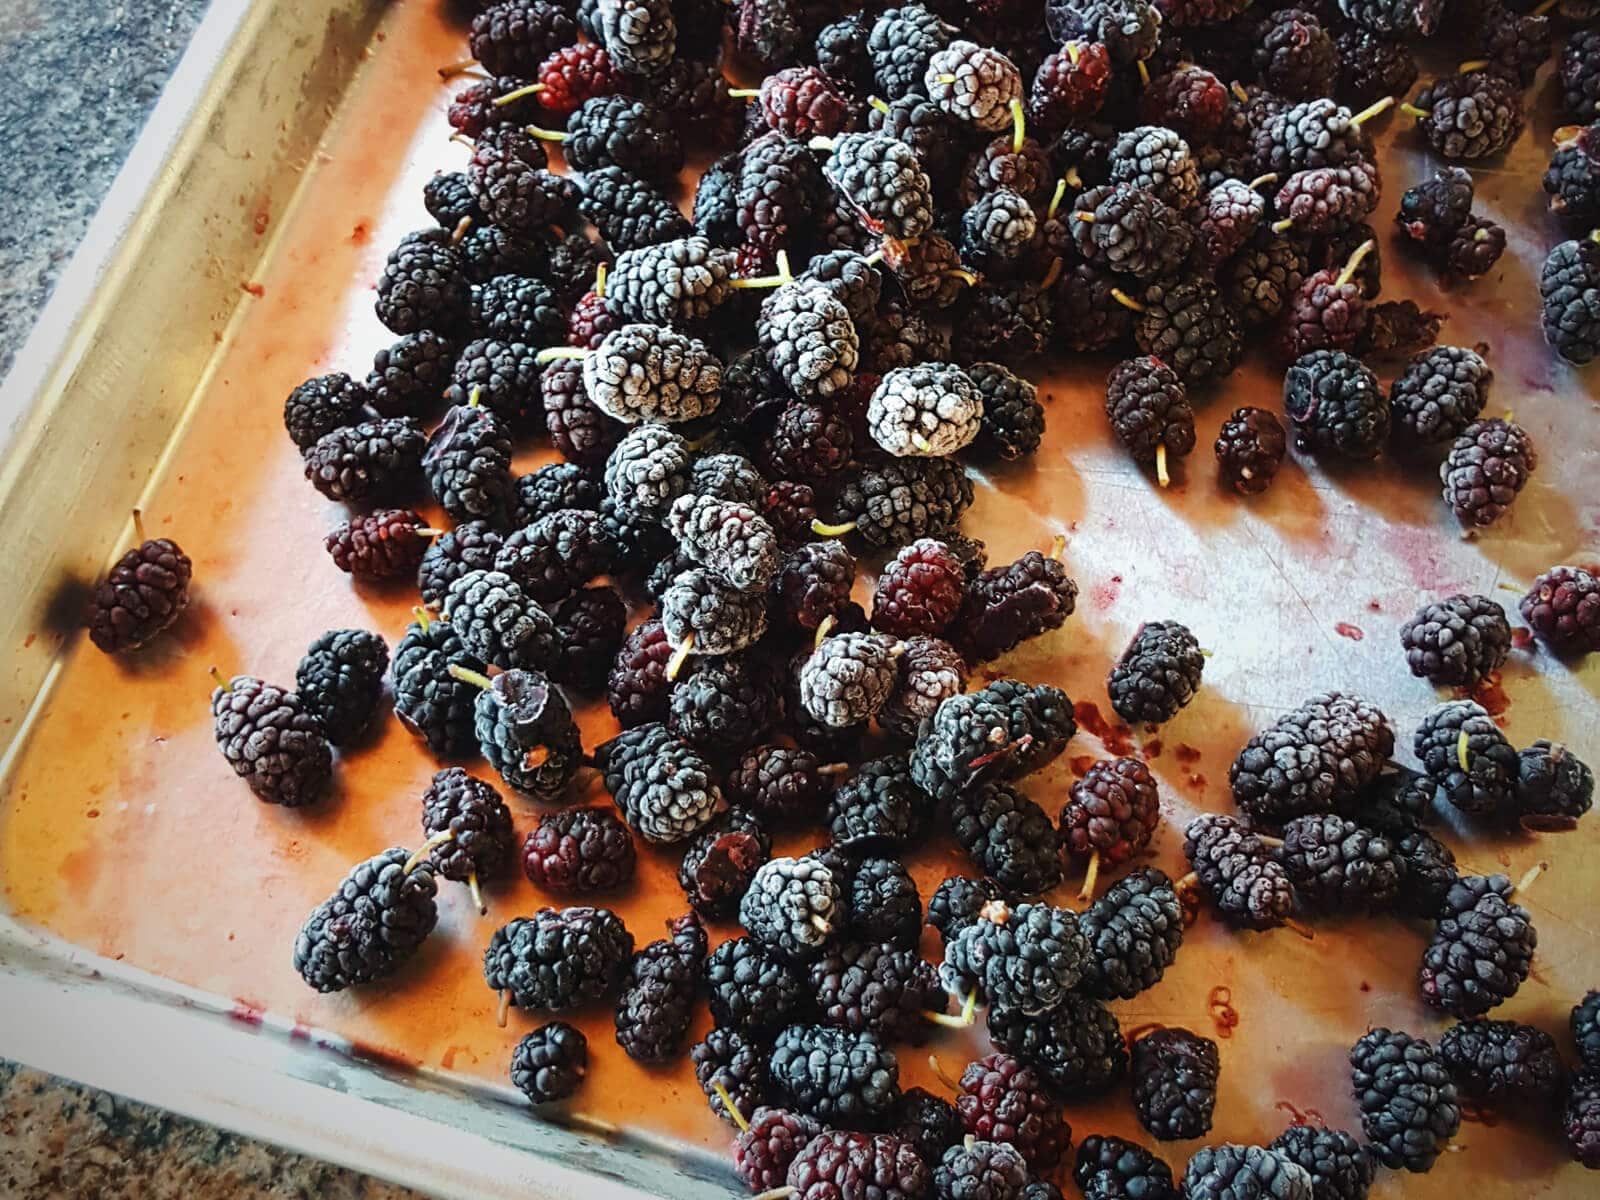 Frozen fruits make excellent jams and preserves